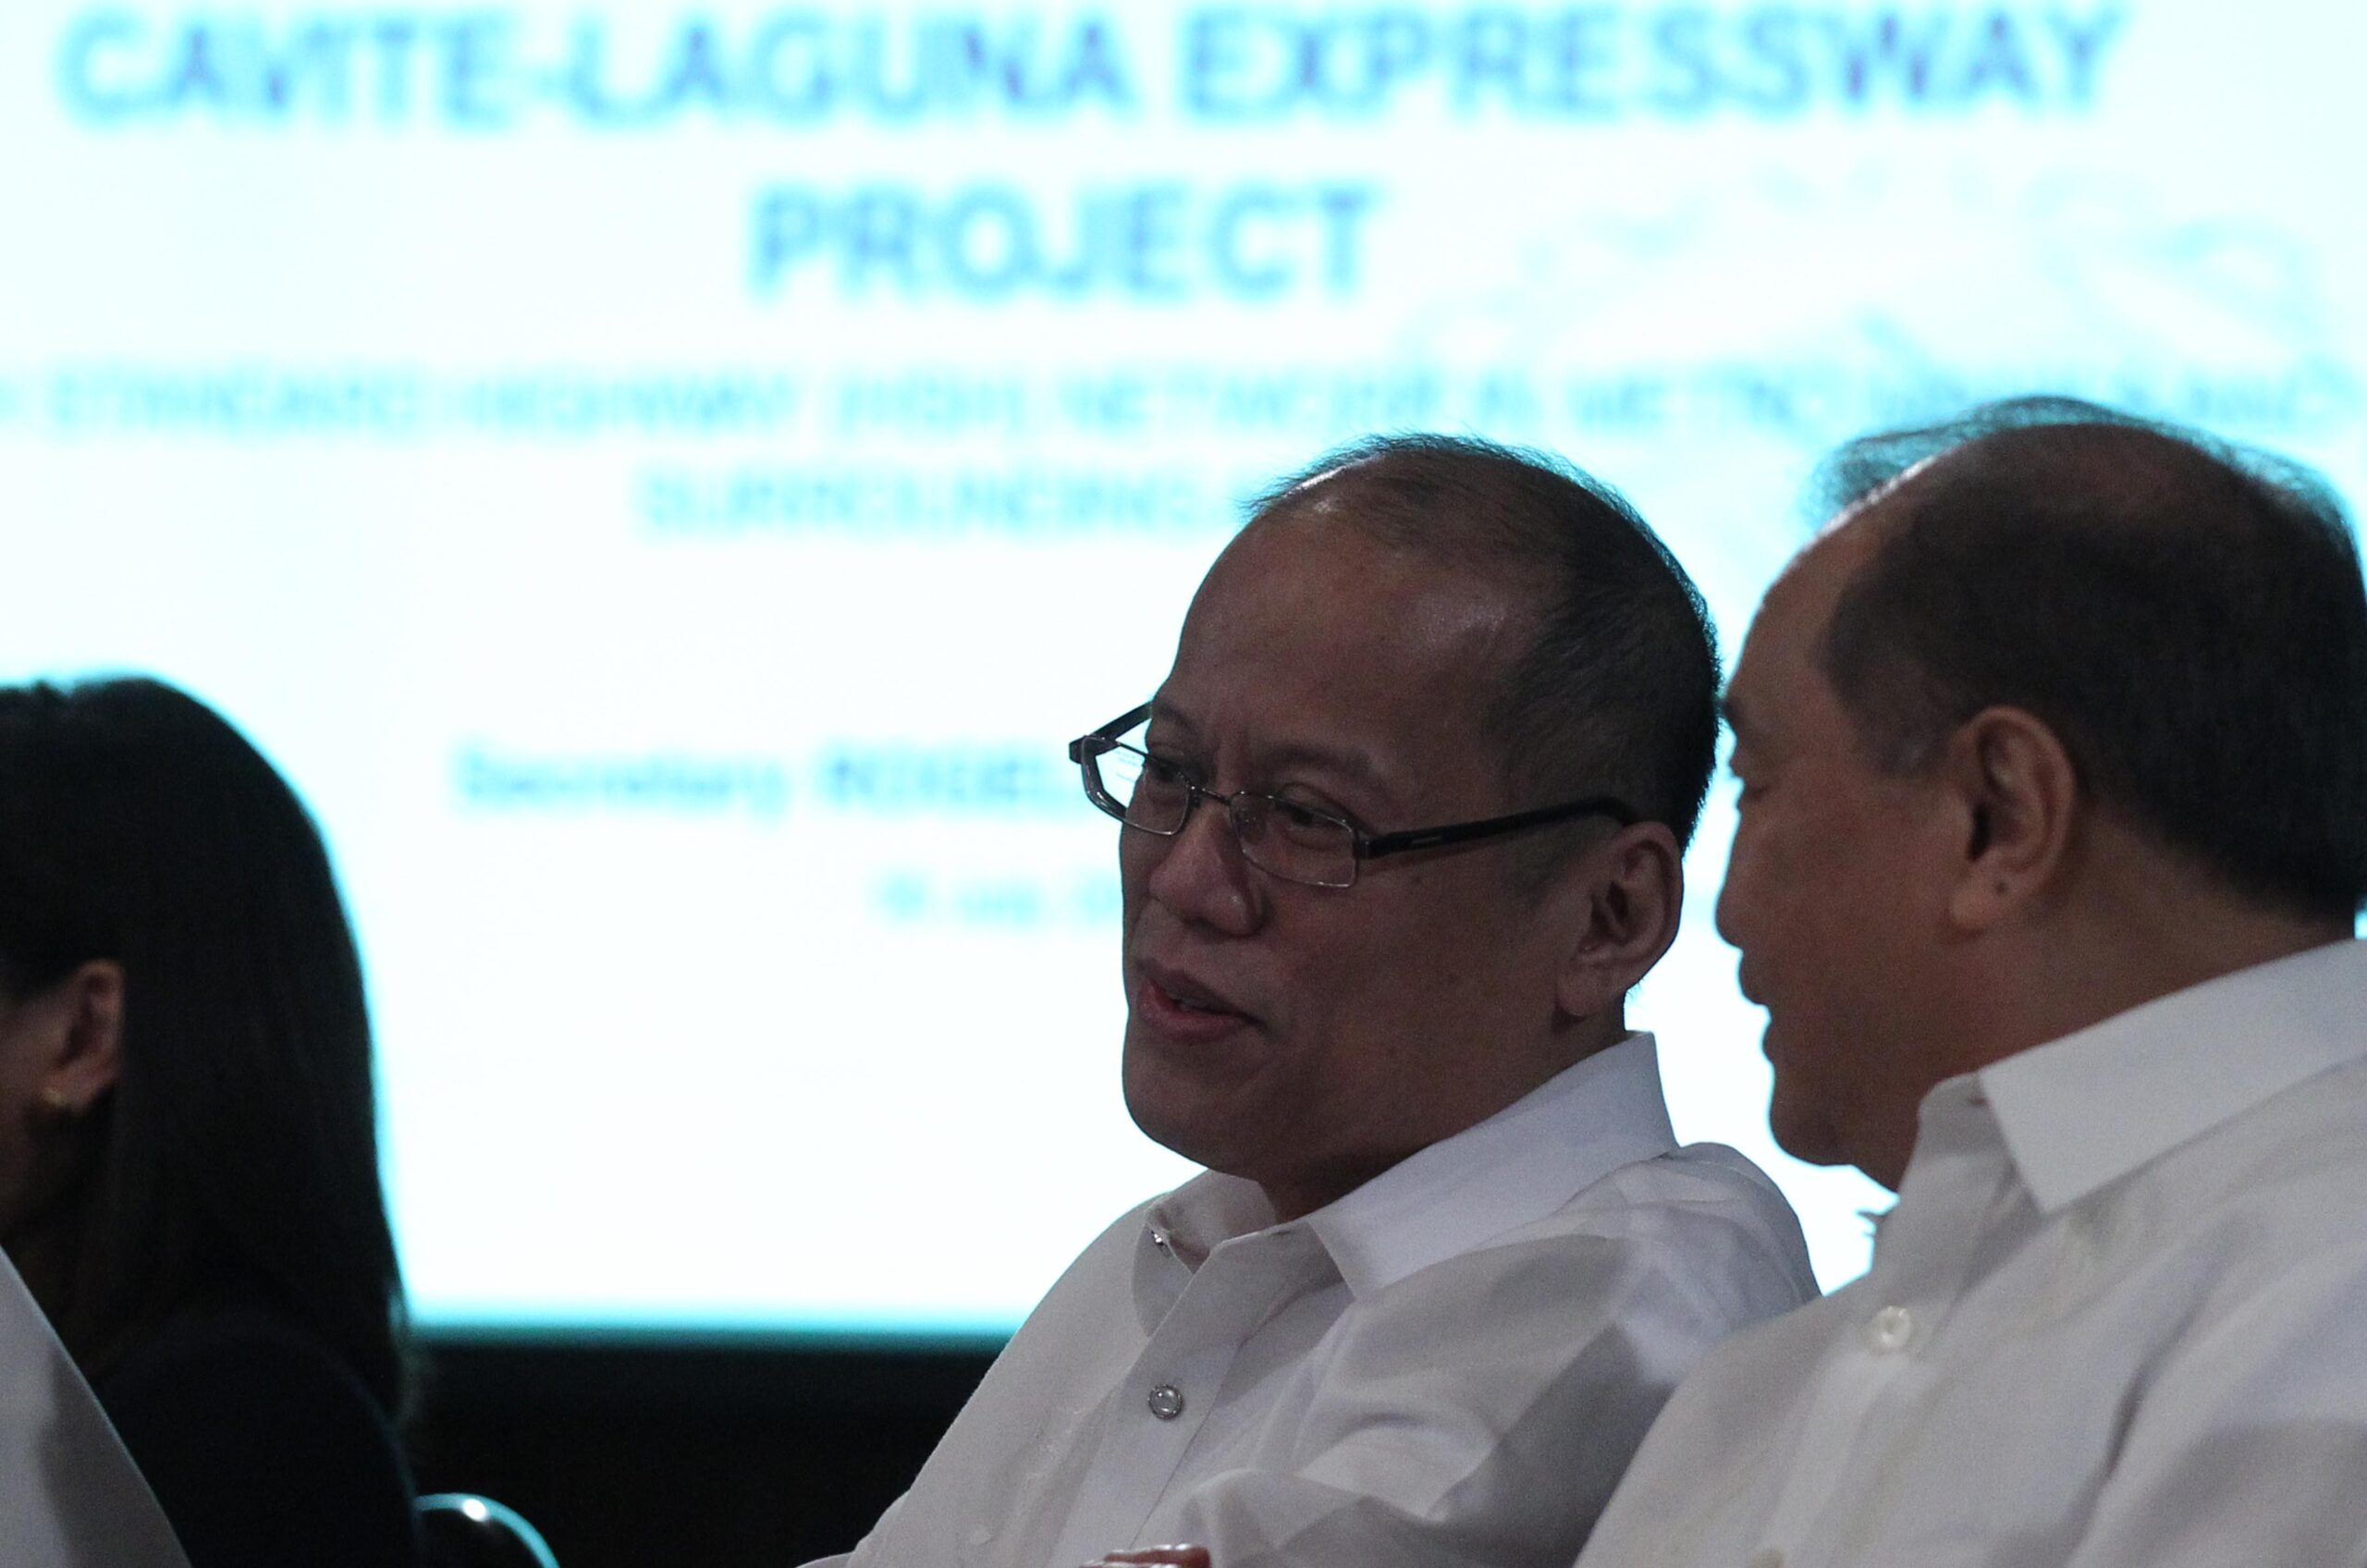 MPIC aims to start Cavite-Laguna expressway construction by 2017